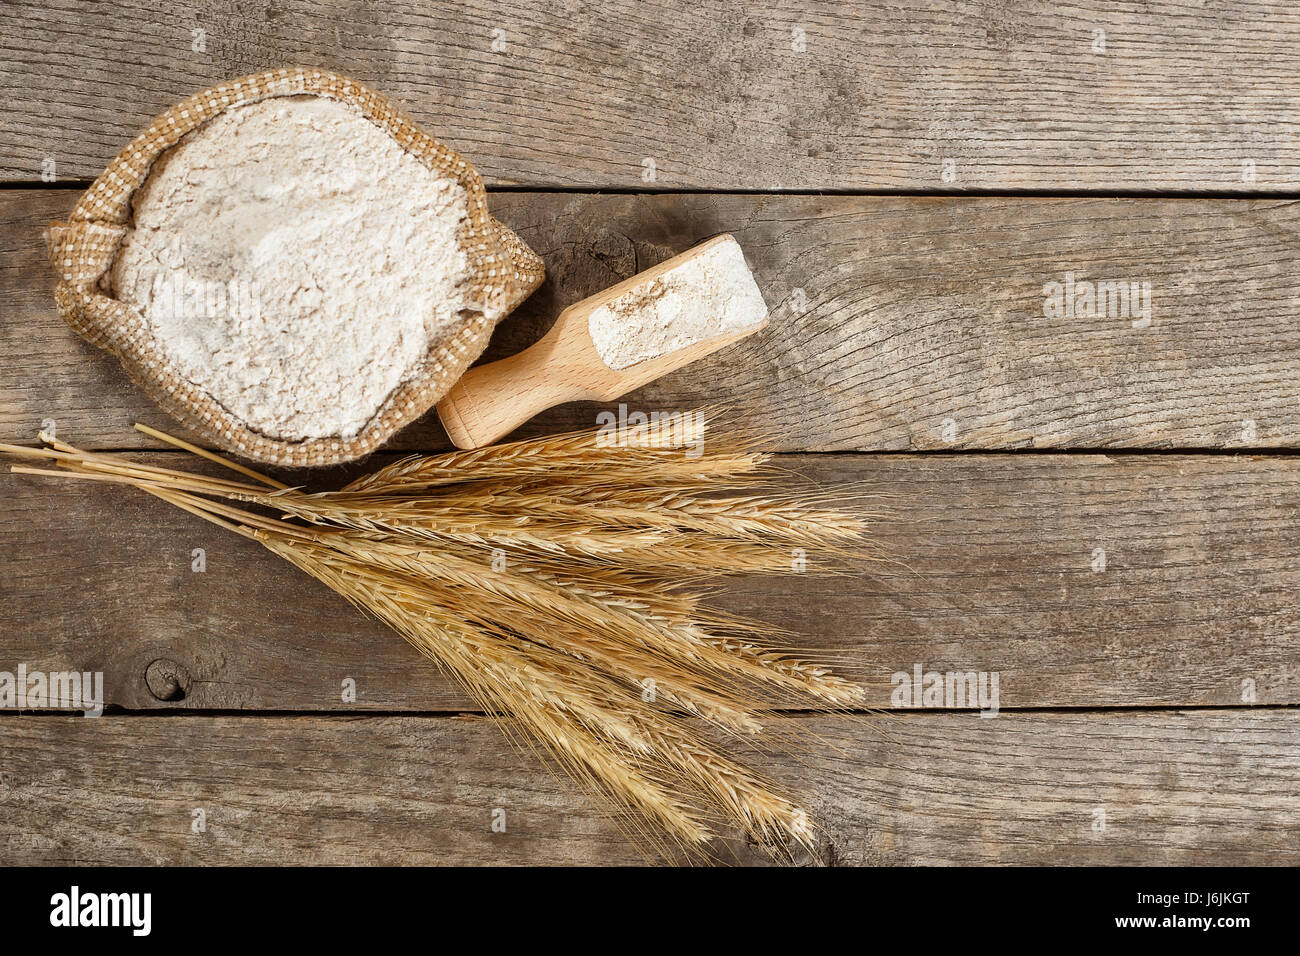 wholegrain flour in burlap bag and wheat ears on wooden table. Top view. Copy space. Baking background. Flour Stock Photo